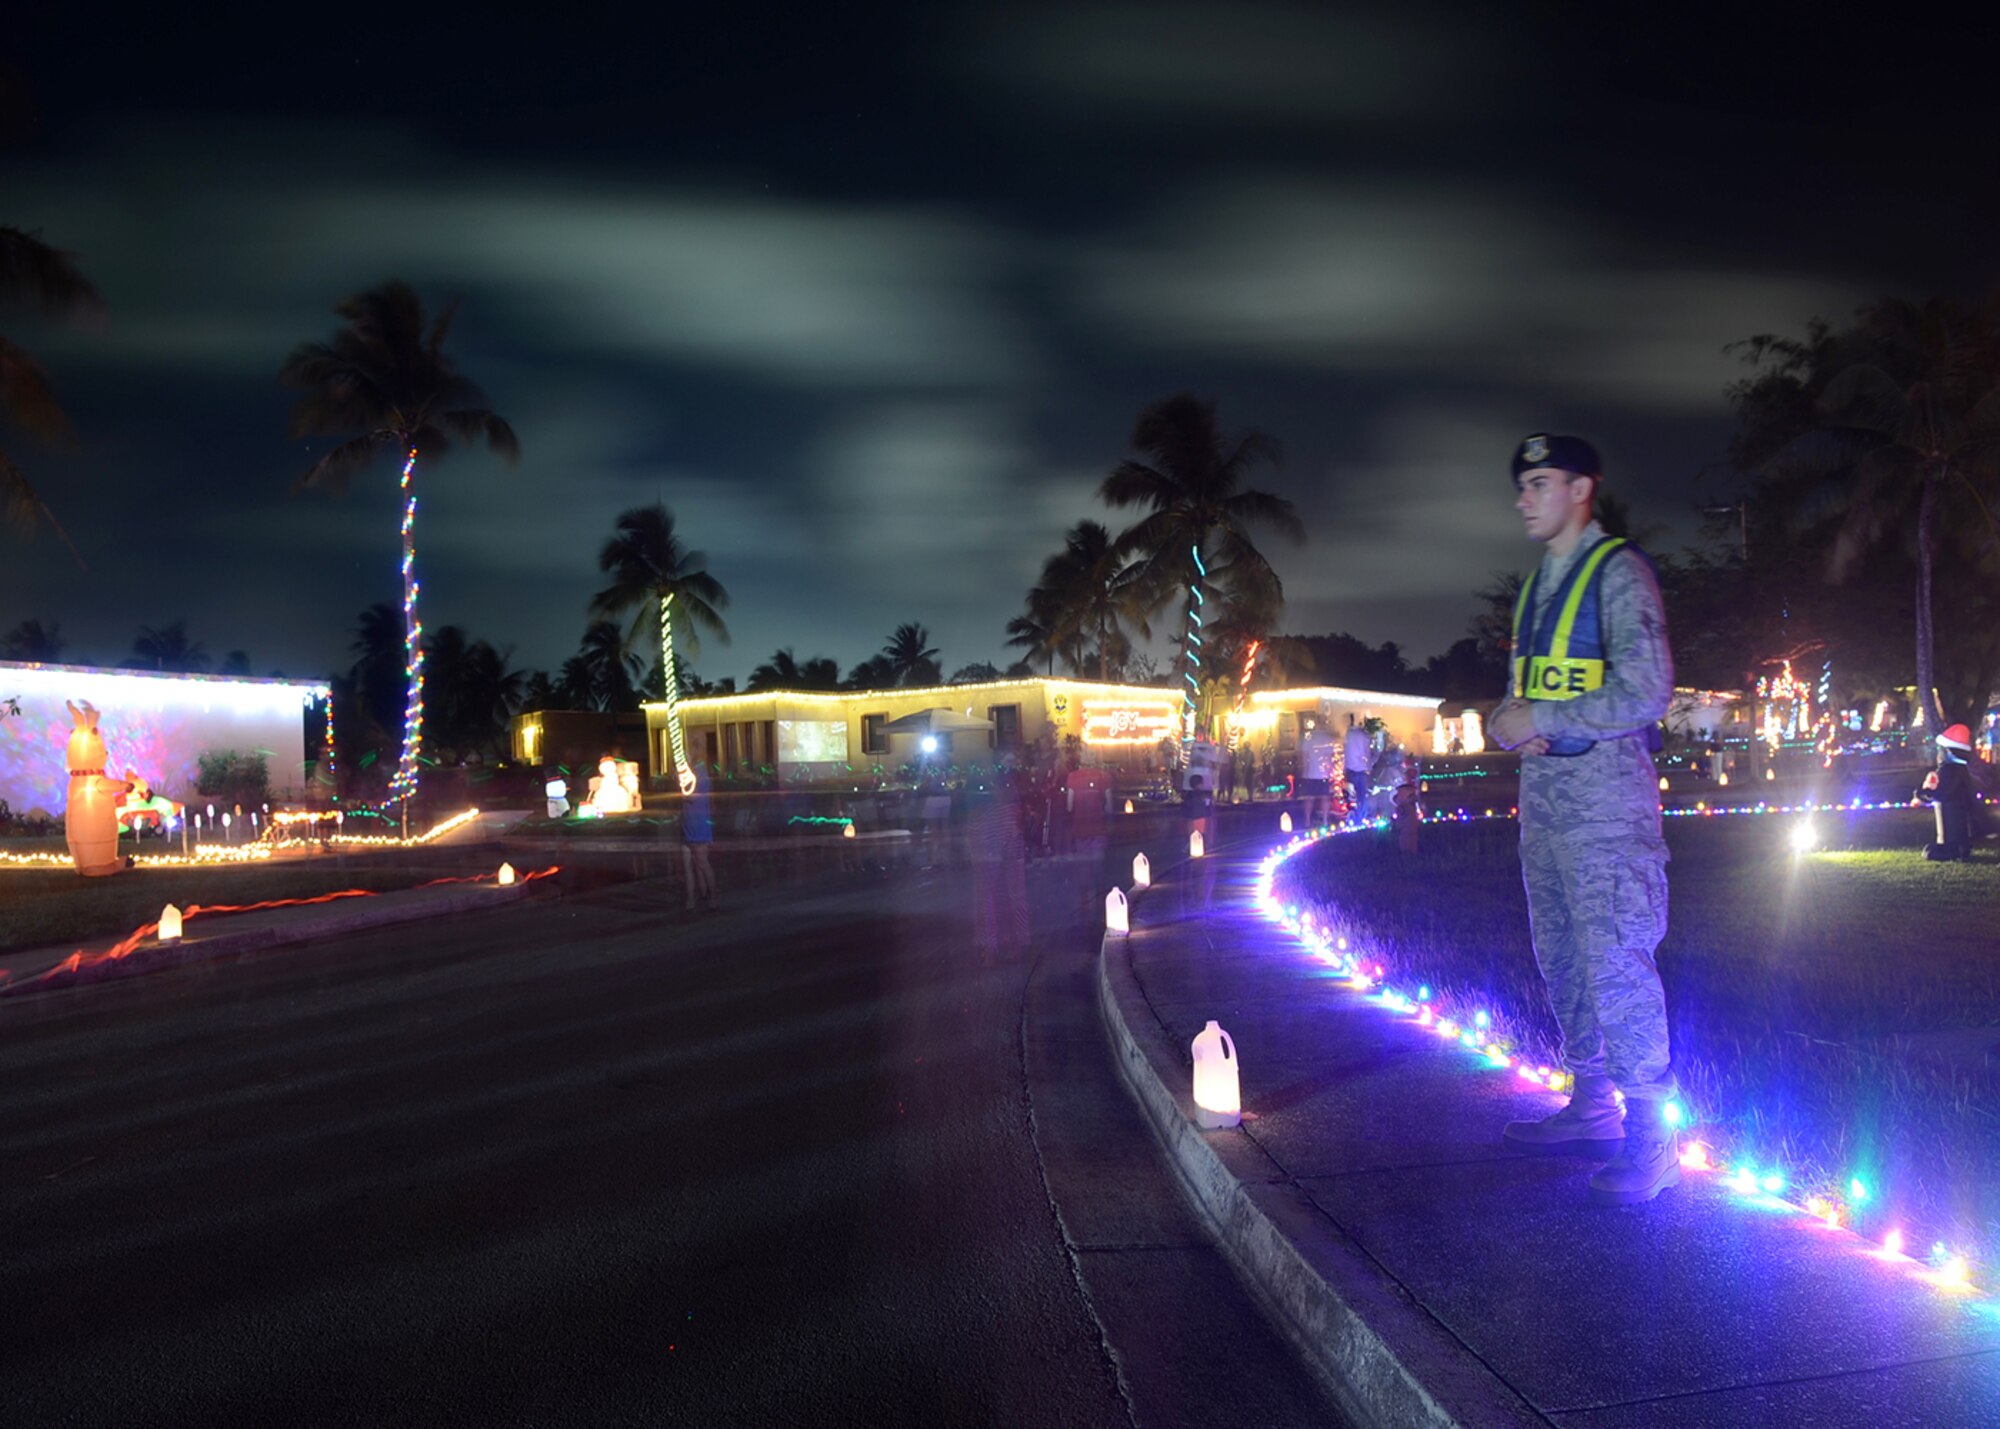 Airman 1st Class Jon Simotas, 36th Security Forces Squadron, helps ensure the safety of several hundred pedestrians participating in the annual Rota Walk Dec. 13, 2014, at Andersen Air Force Base, Guam. More than 300 military members and civilians attended the event which is held every December. (U.S. Air Force photo by Tech. Sgt. Zachary Wilson/Released)